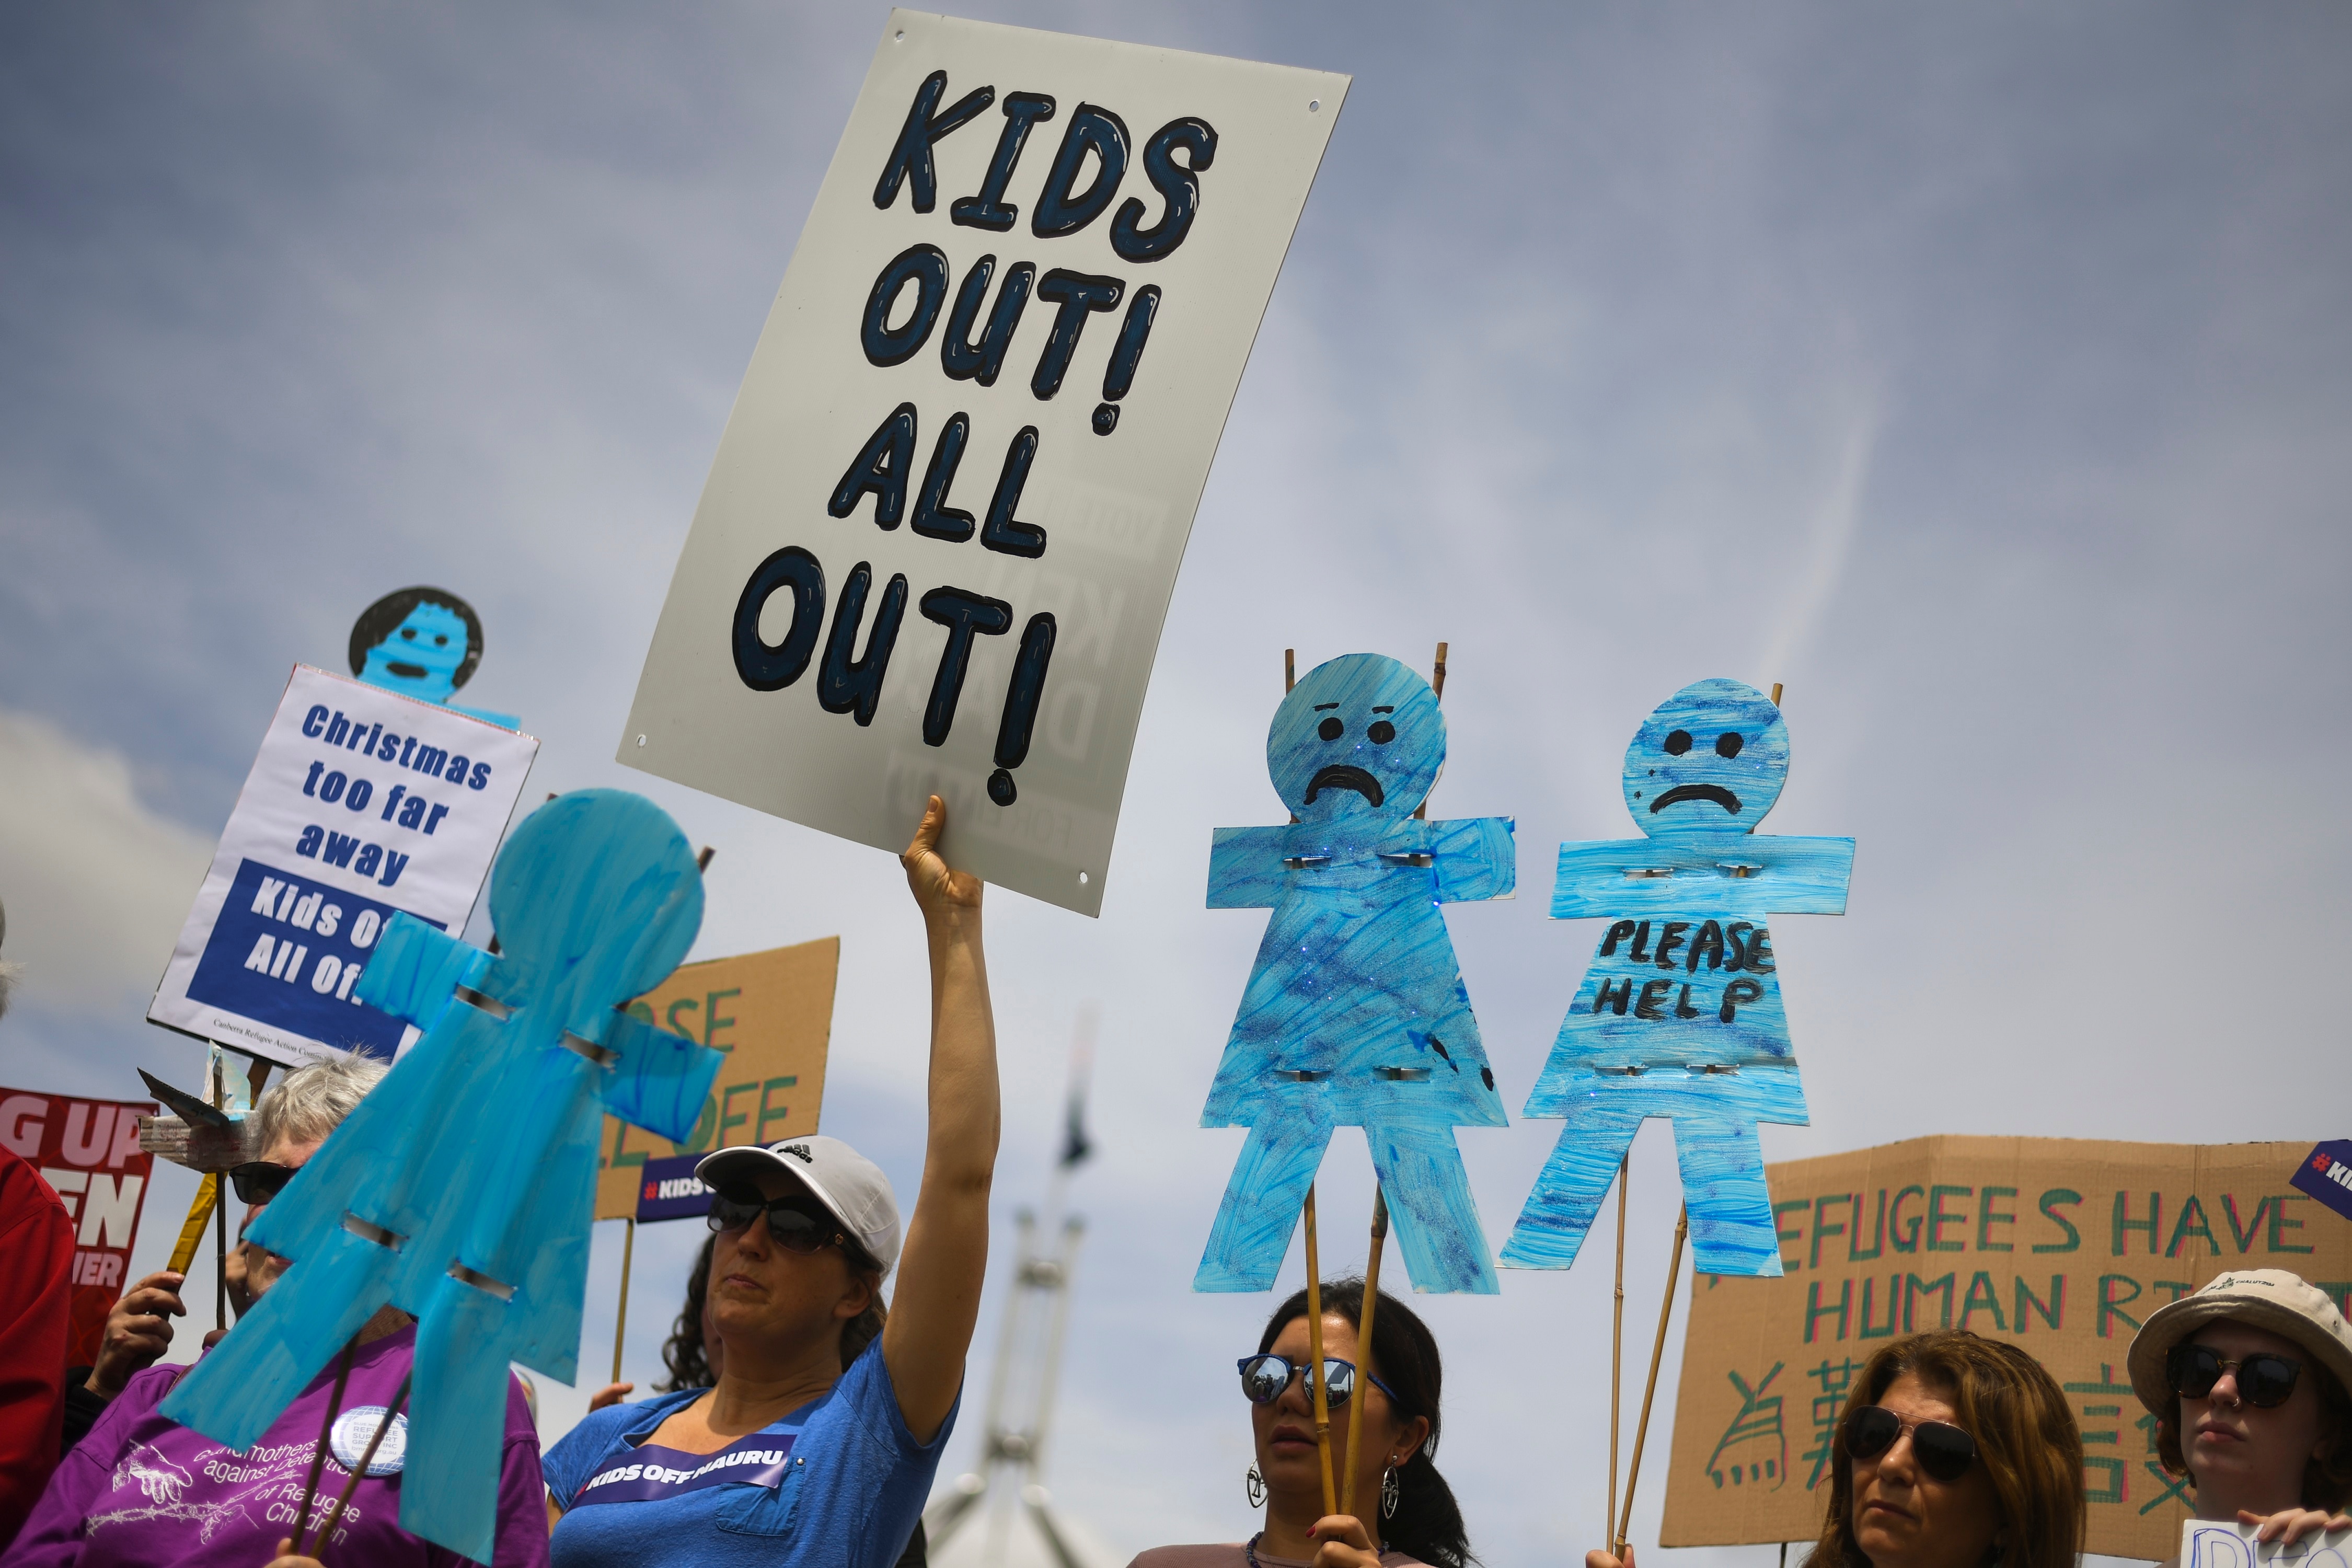 Protesters hold up signs during a rally demanding the resettlement of kids held on Nauru outside Parliament House in Canberra, Tuesday, November 27, 2018.